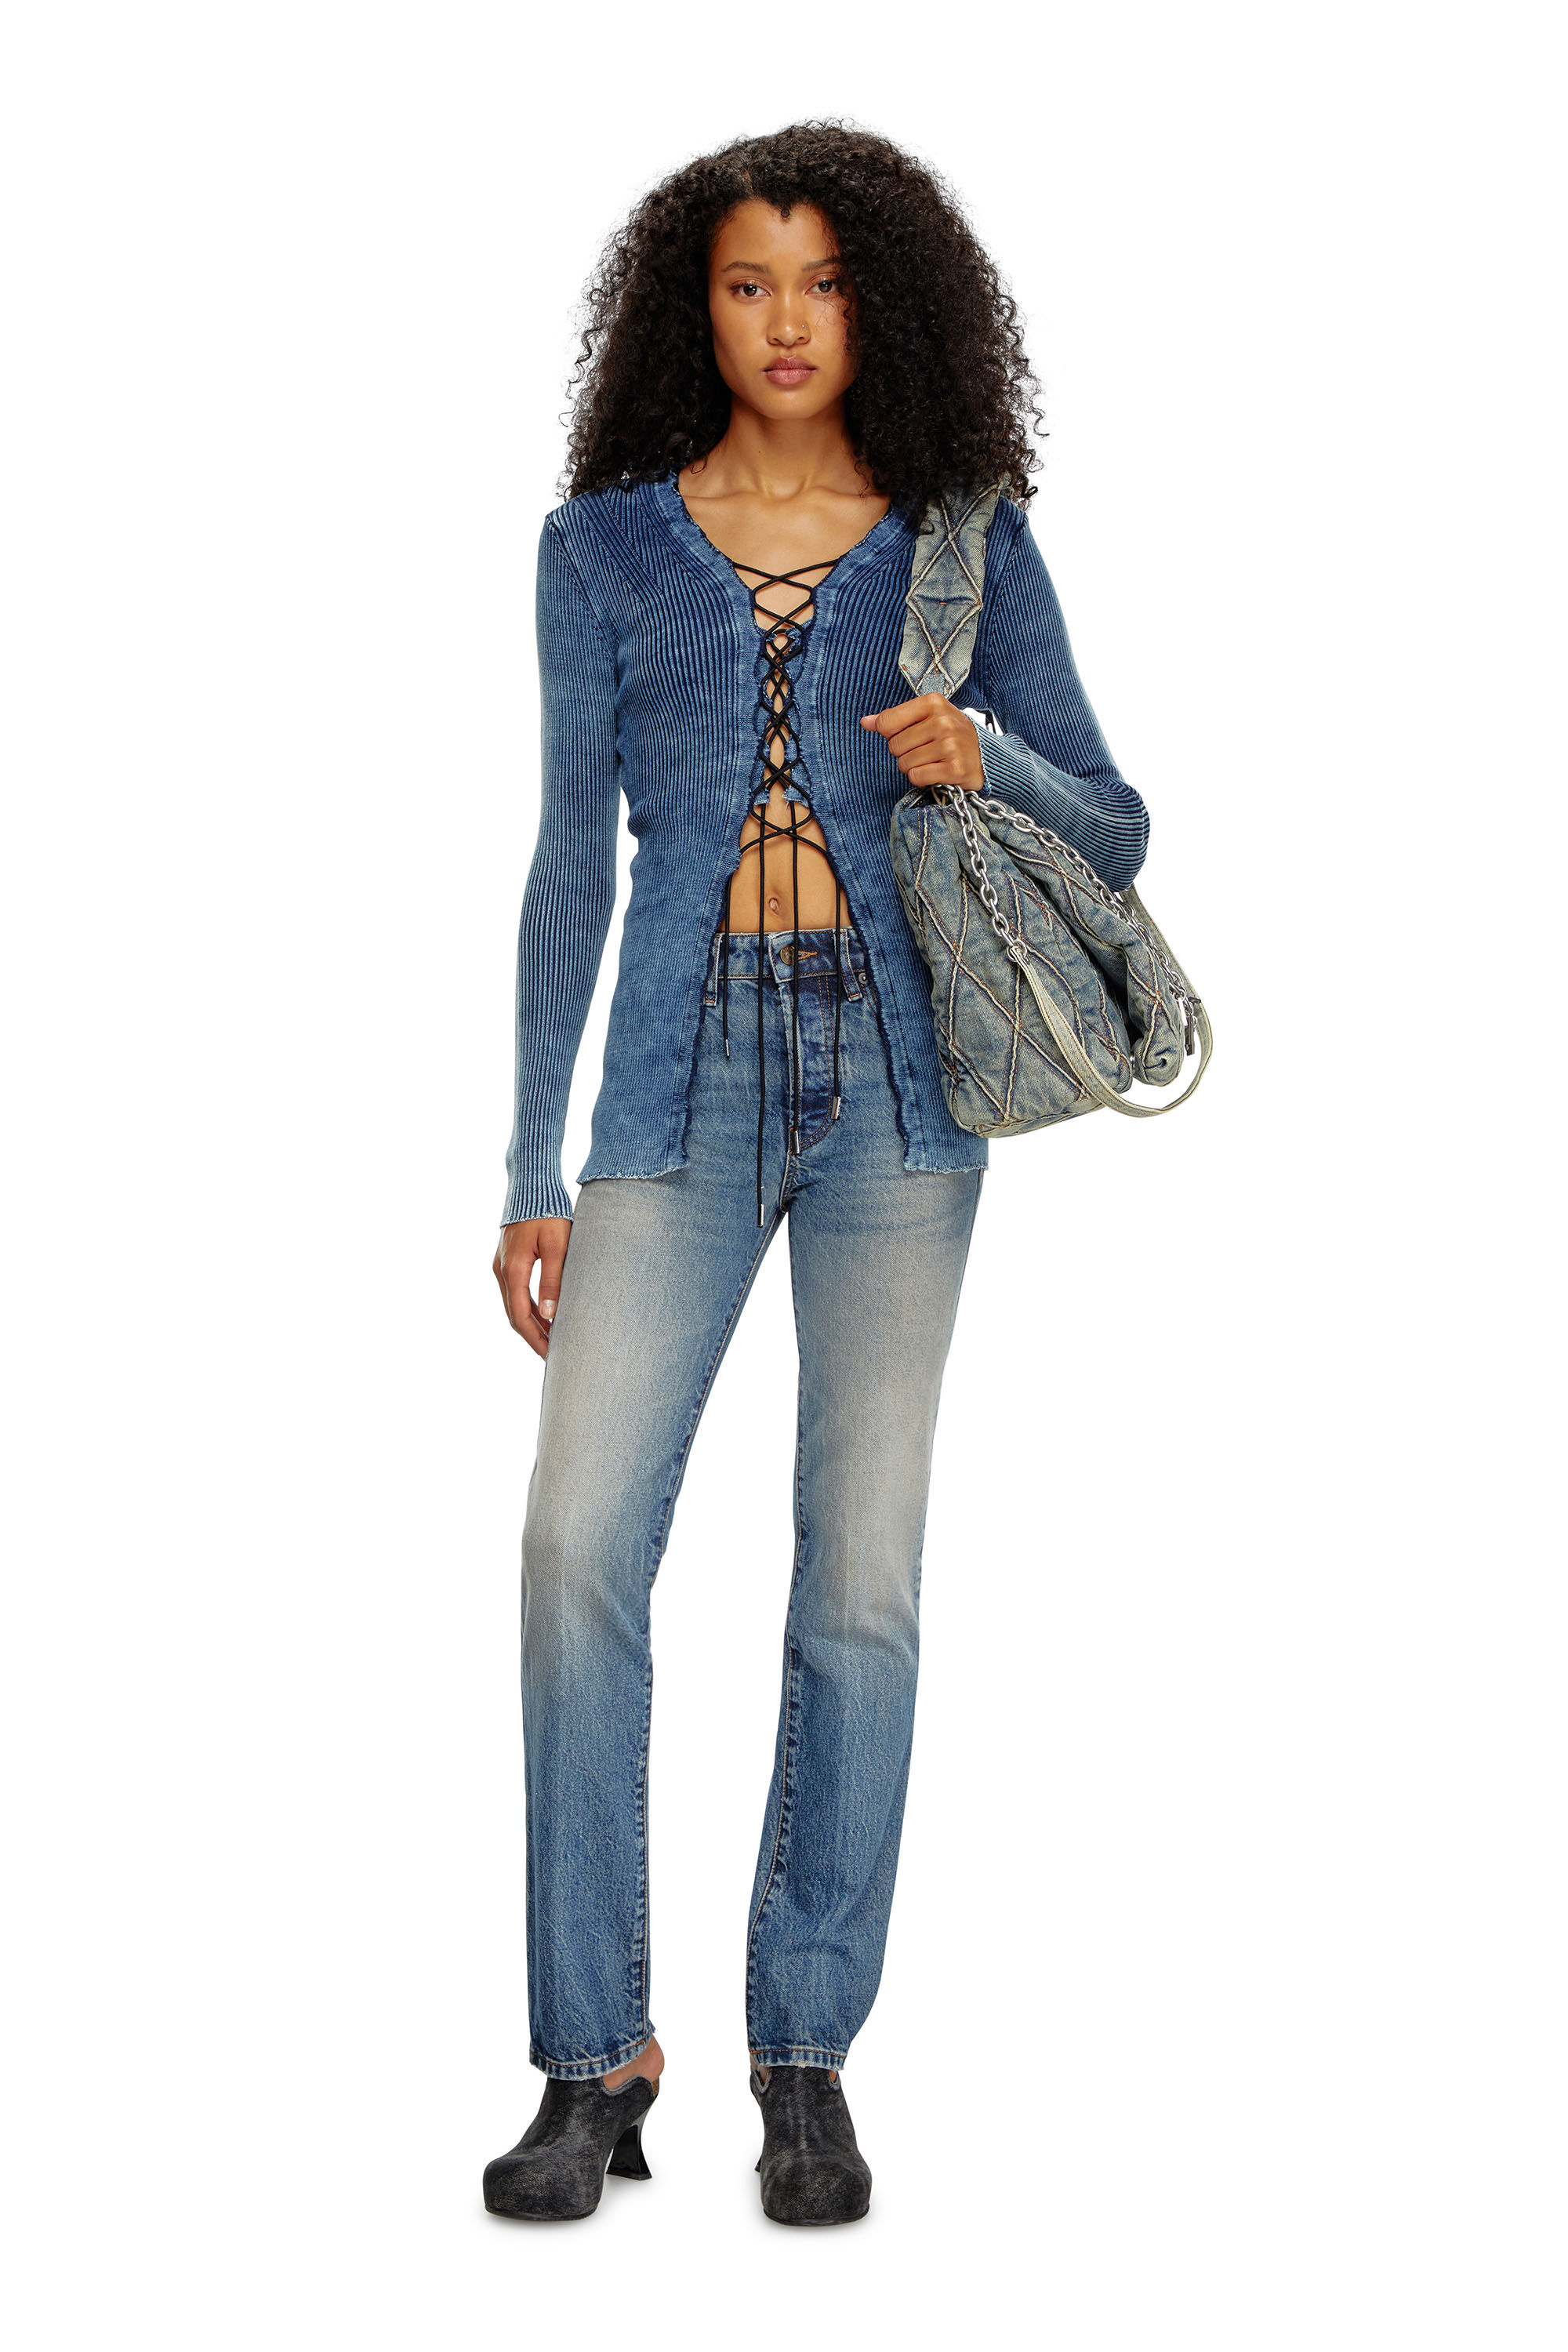 Diesel - Straight Jeans 1989 D-Mine 0GRDH, Mujer Straight Jeans - 1989 D-Mine in Azul marino - Image 1